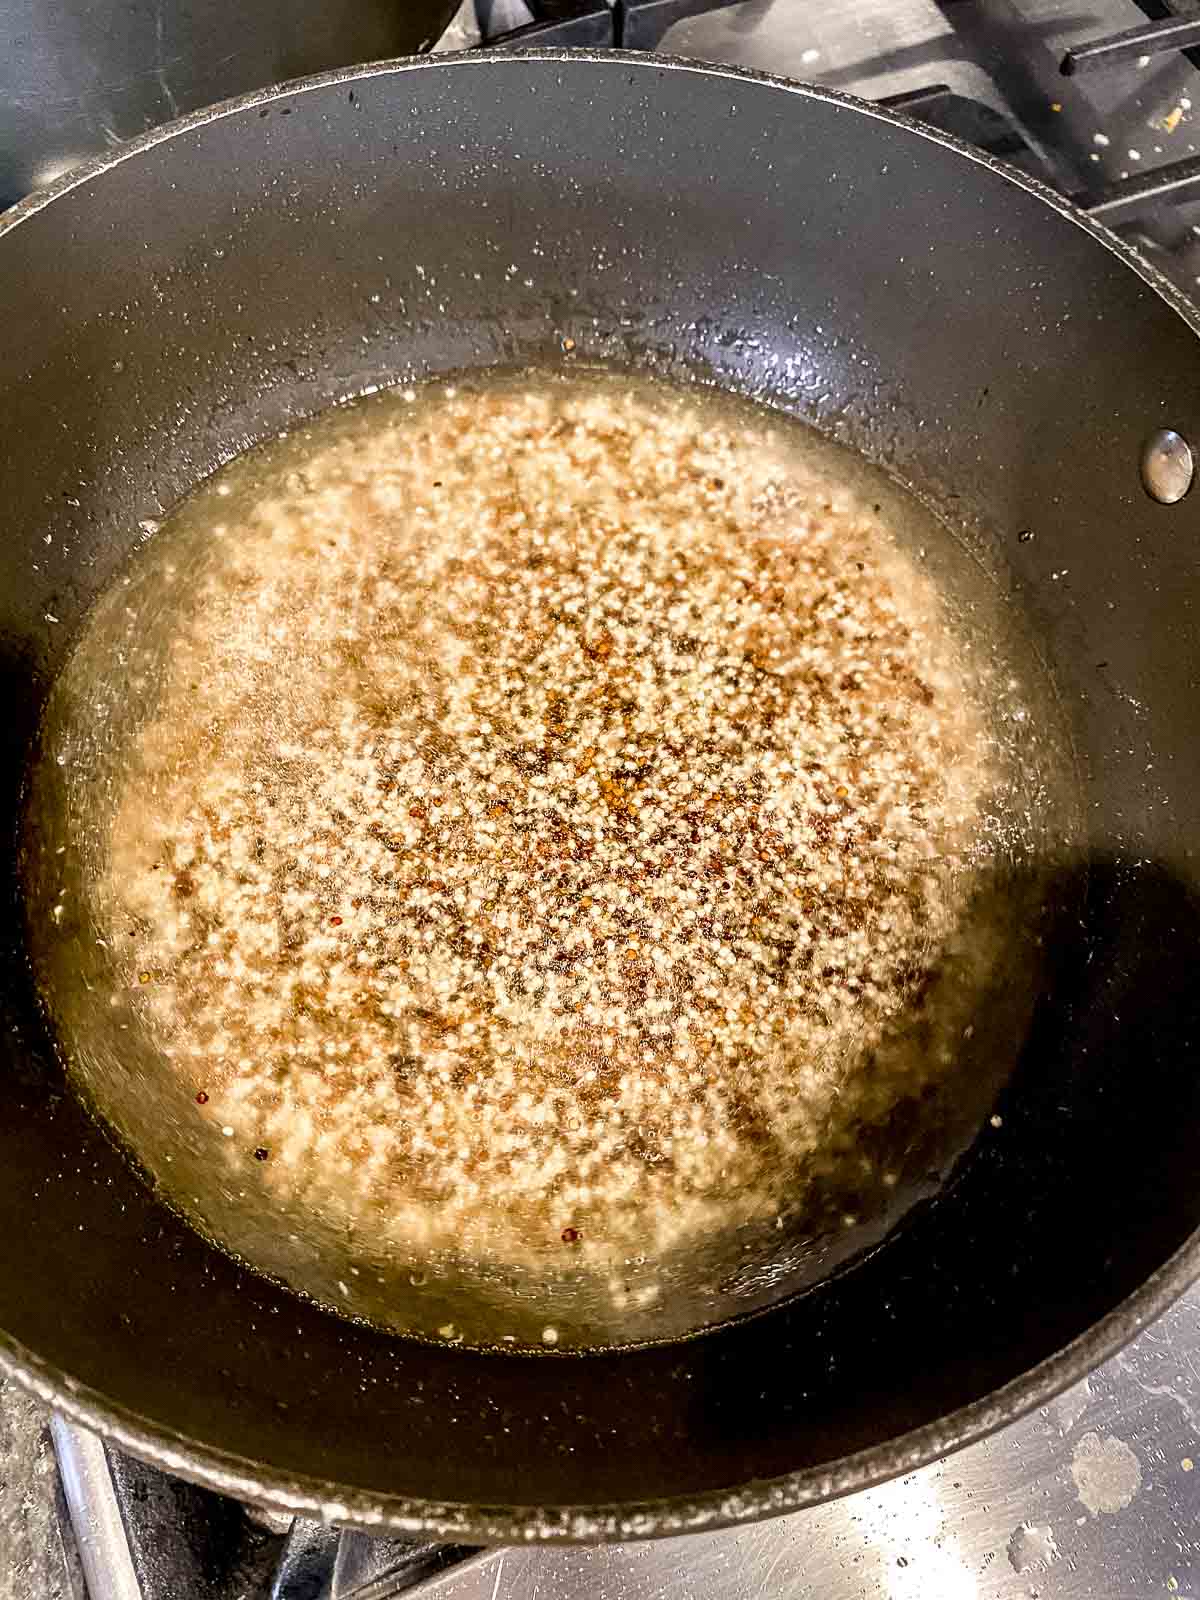 Water and quinoa in a pot